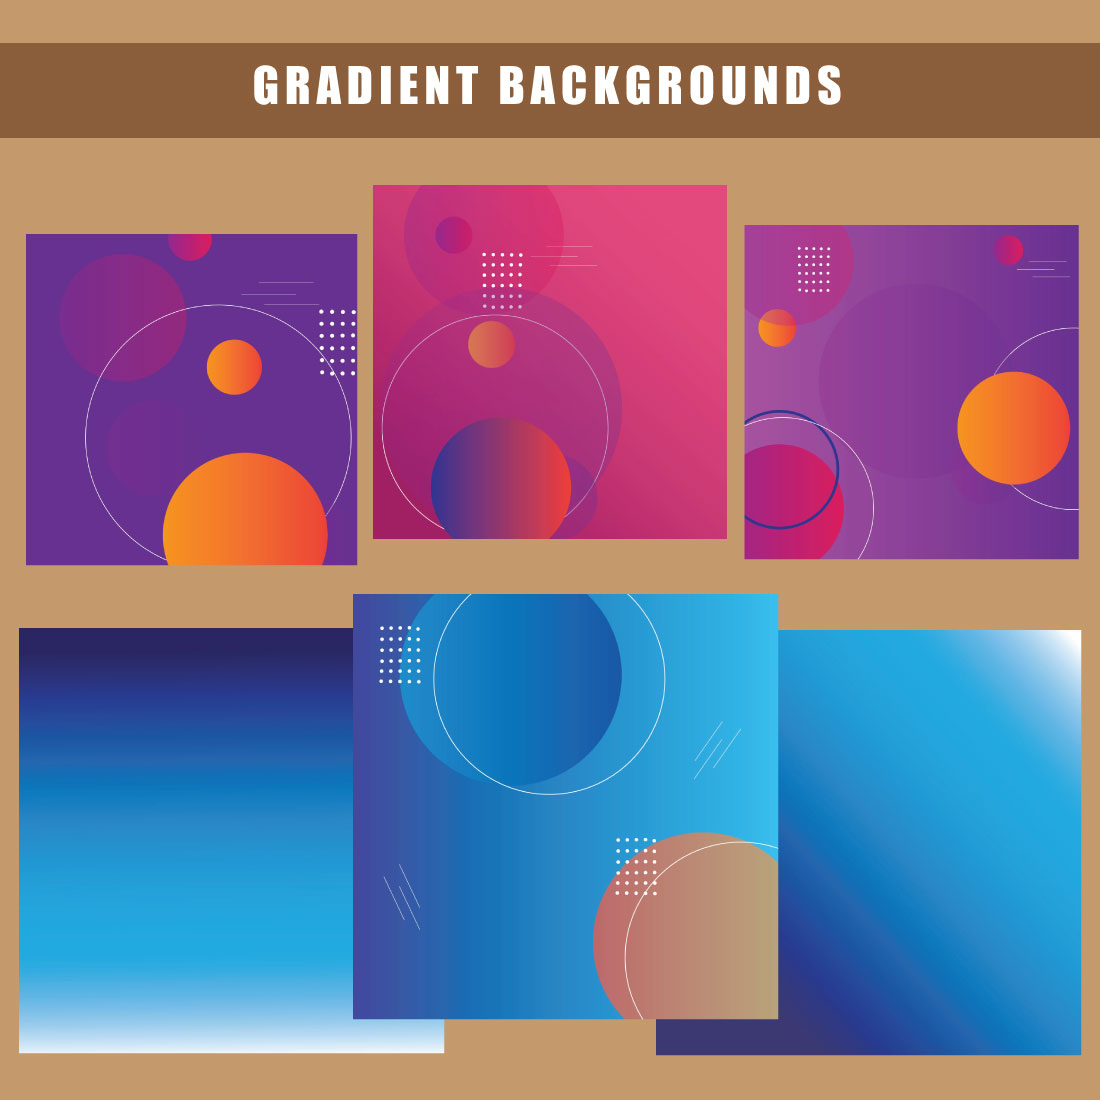 Beautiful Gradient Backgrounds cover image.